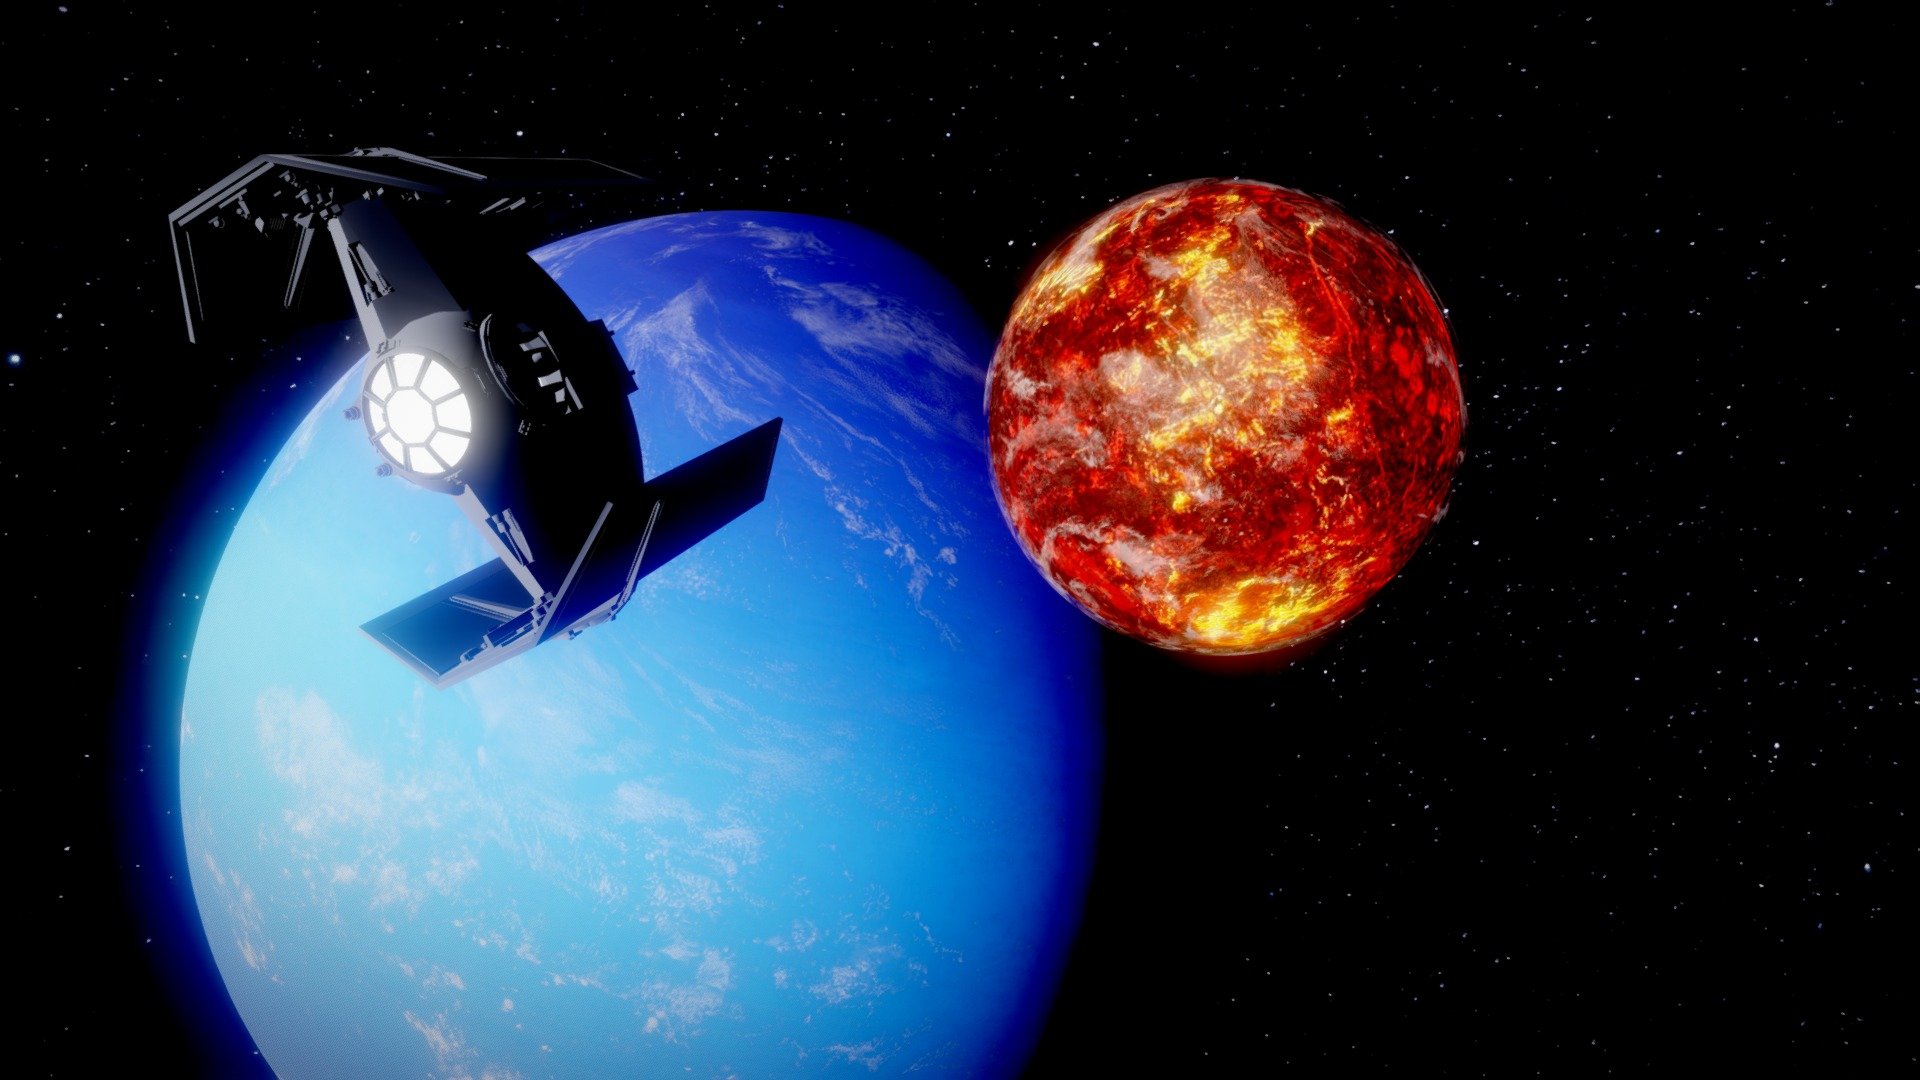 The model represents Mustafar, a fictional small terrestrial planet of the Star Wars saga which is characterized by a strong volcanic activity due to tidal effects caused by the close proximity of two gas giant planets. The volcanic activity of Mustafar recalls that of Io, the innermost of the Galilean moons of Jupiter. As Mustafar, Io is characterized by an extreme geologic activity (with more than 400 active volcanos) resulting from tidal heating from friction generated in its interior because of the close proximity with Jupiter and the other Galilean moons. In recent years, thousands of extrasolar planets have been discovered. Among these, an emerging class is that of highly volcanic exoplanets, also referred as lava worlds, magma ocean worlds, or super-Ios. An example is 55 Cancri e, a terrestrial planet probably covered in lava and orbiting around the star 55 Cancri.

Credits: Textures modified from solarsystemscope.com. Soudtrack by John Williams 3d model